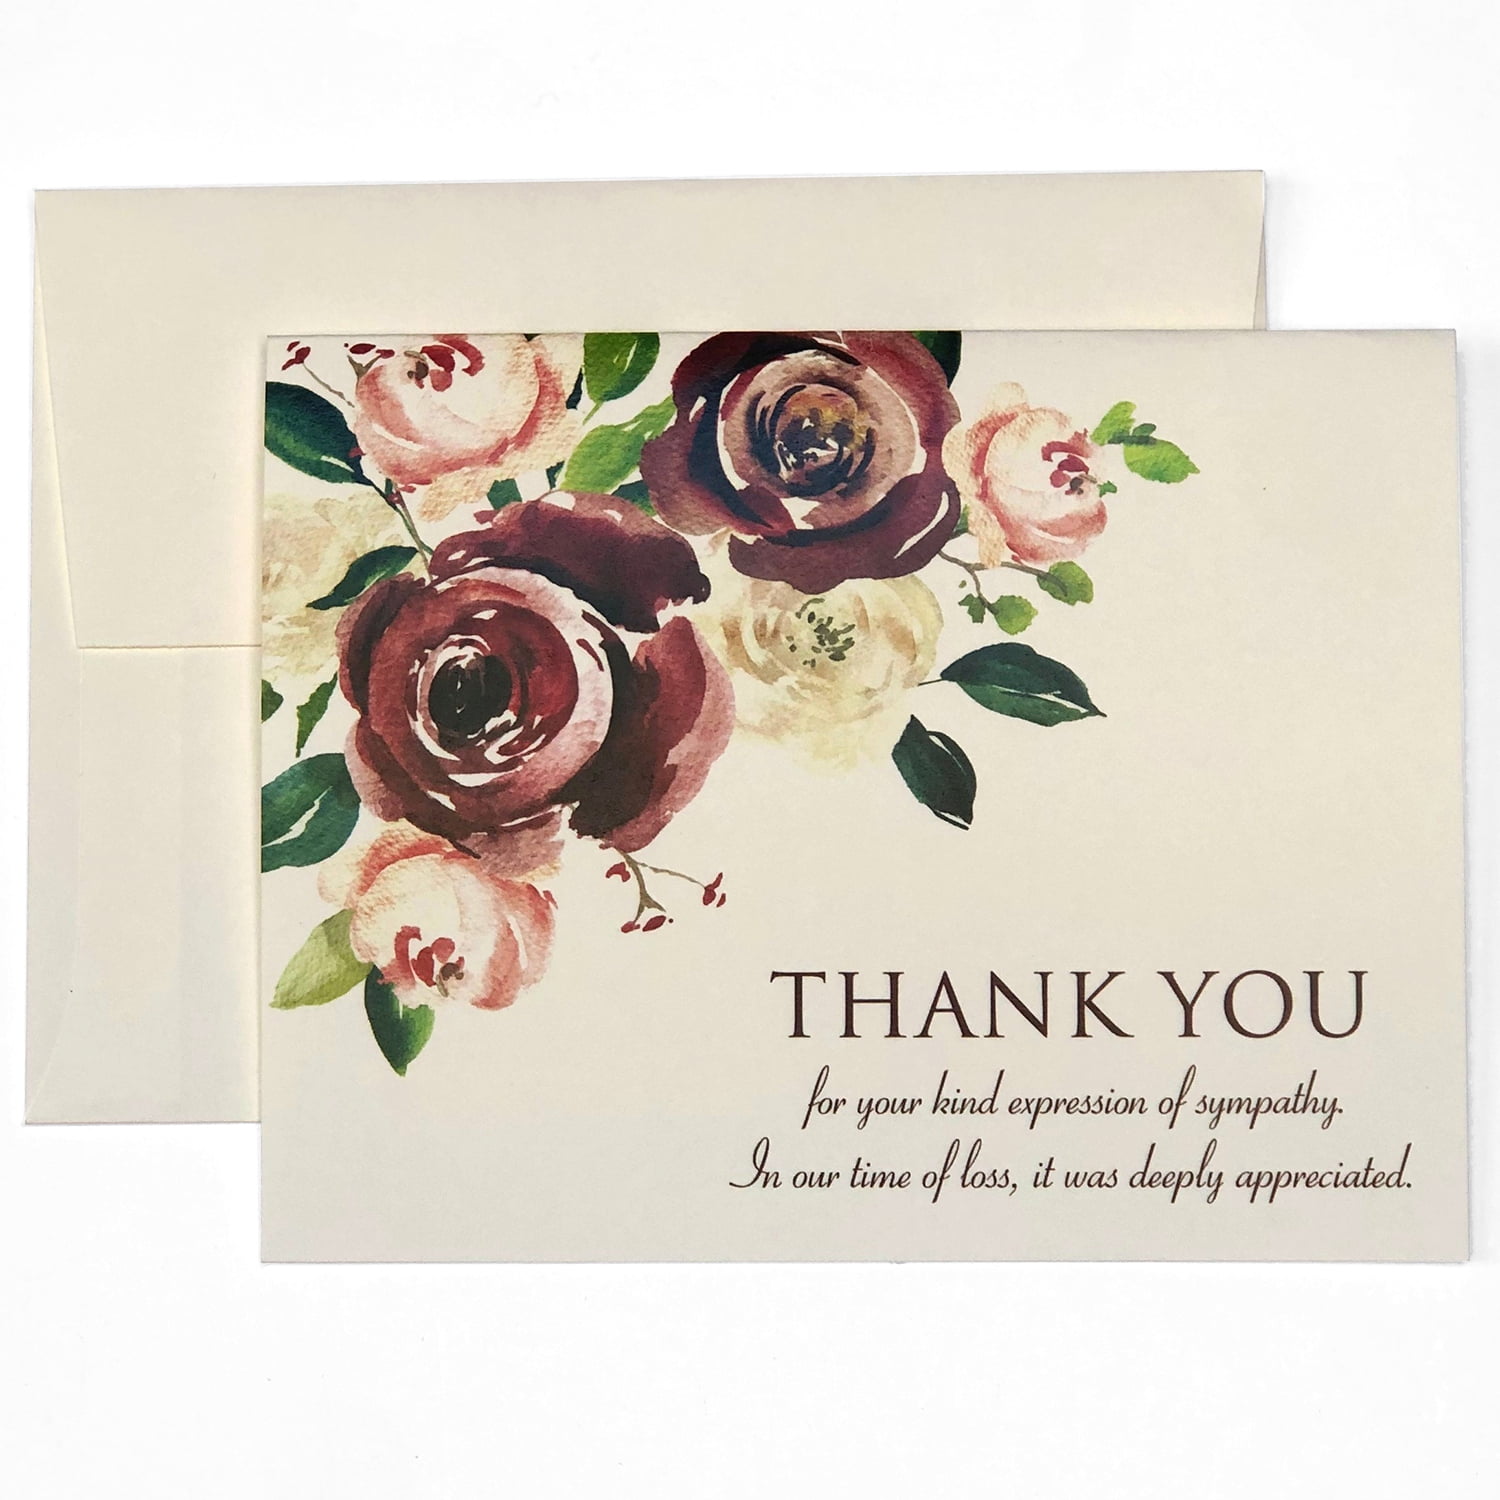 AMERICAN GREETINGS RELIGIOUS THANK YOU WHITE 10 PK NOTE CARDS NEW A21743 